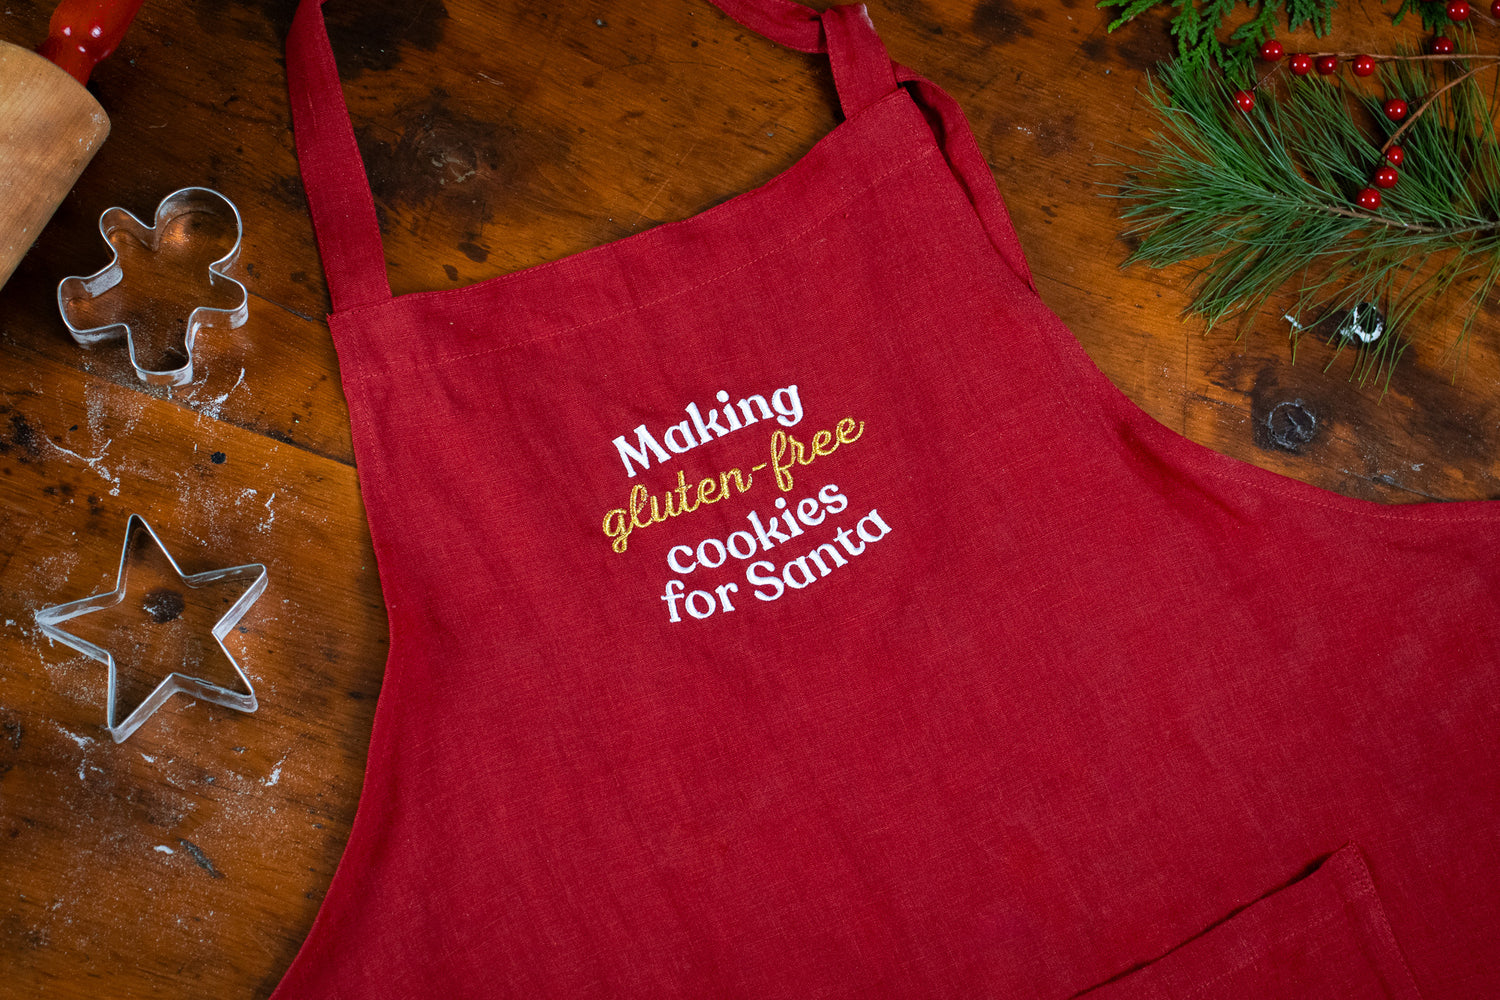 Close-up of apron on a table with embroidery "Making gluten-free cookies for Santa".